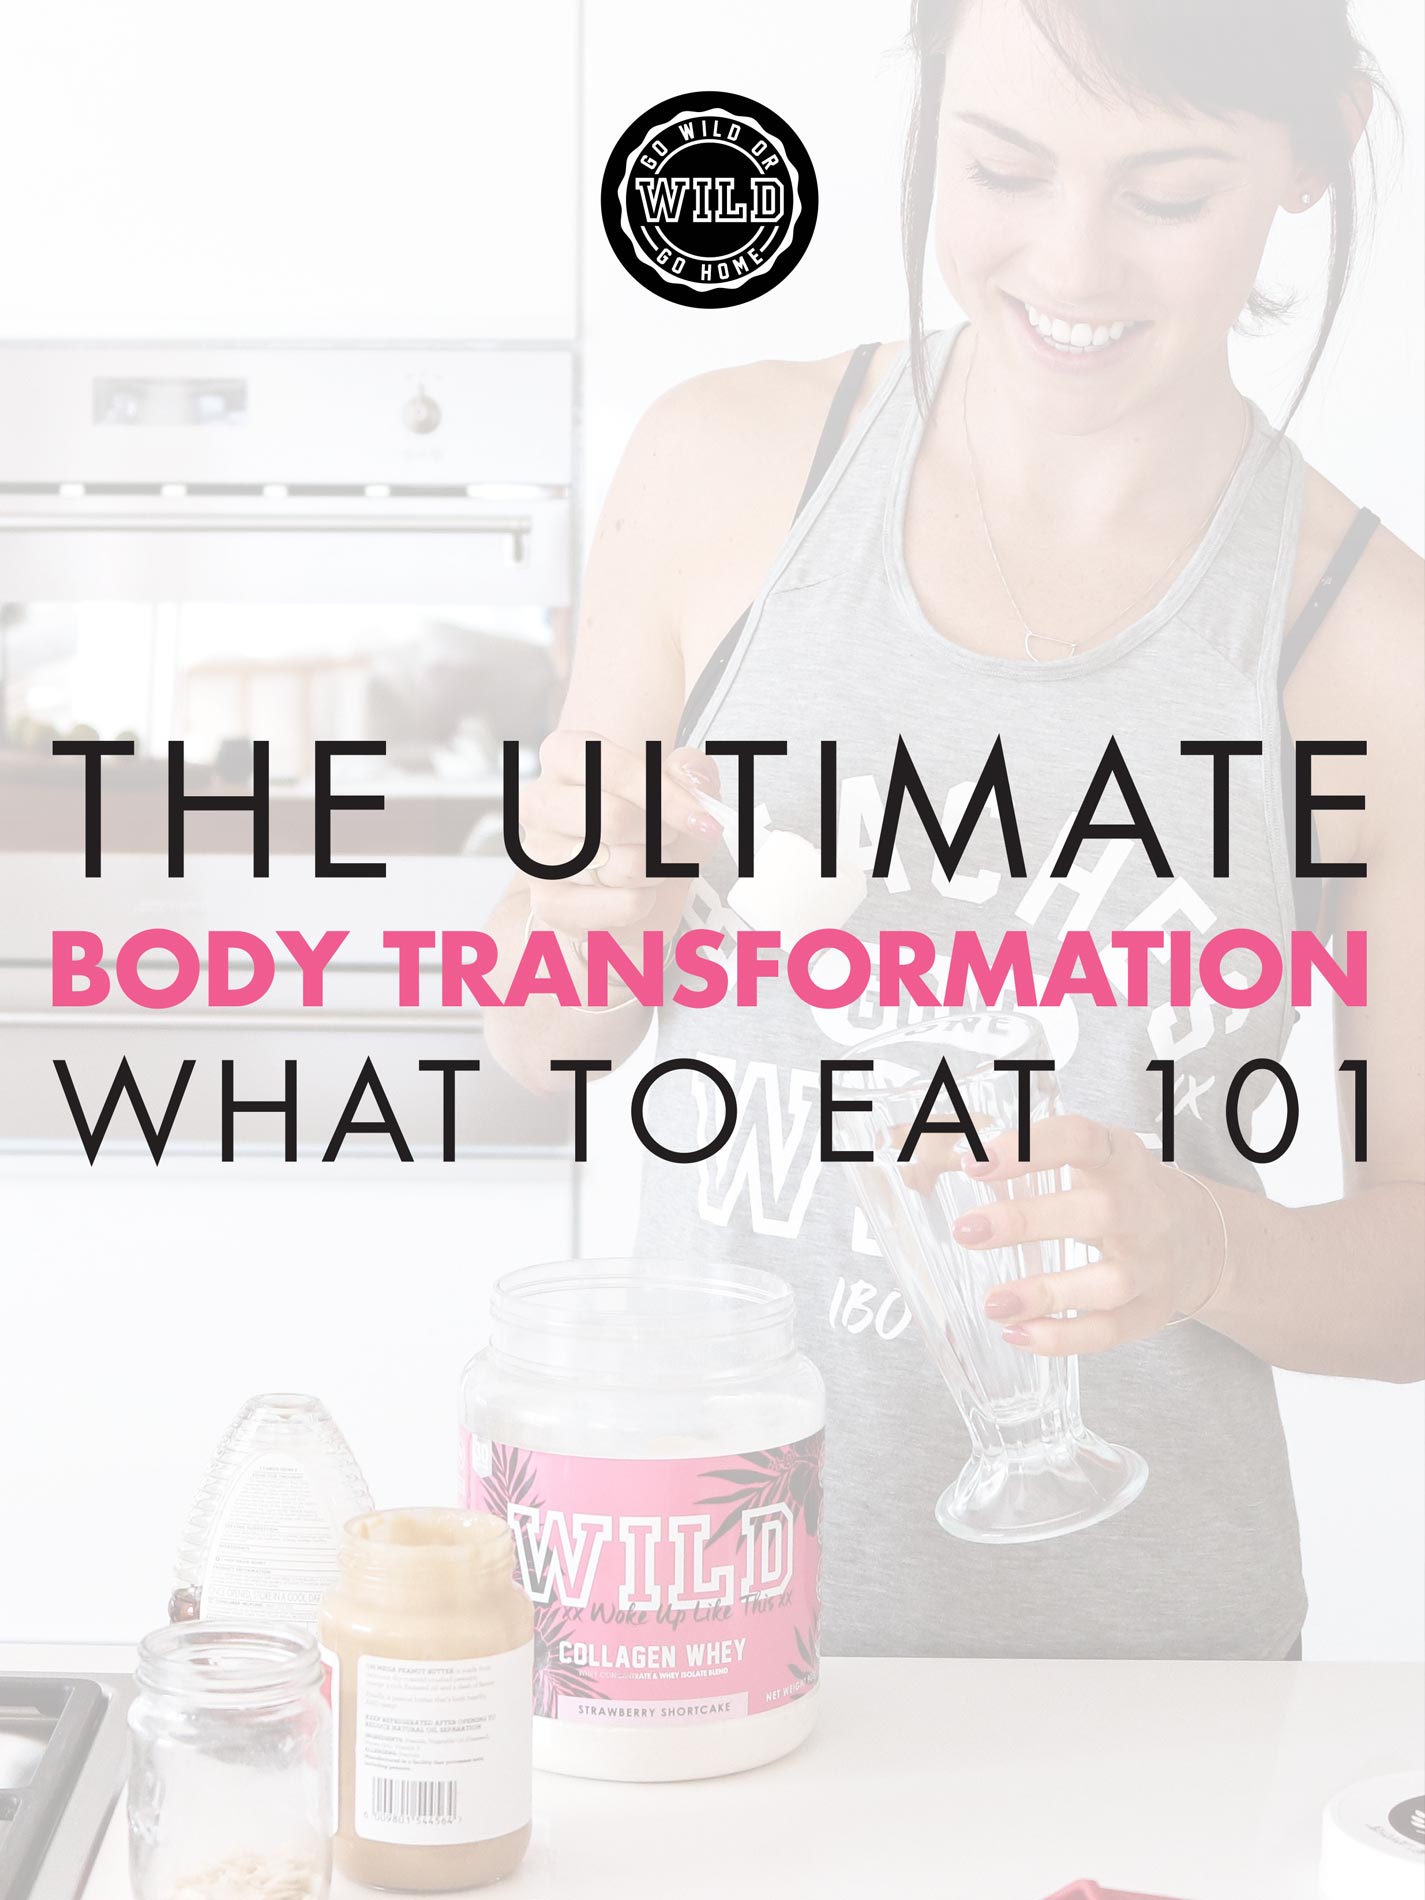 THE ULTIMATE BODY TRANSFORMATION - WHAT TO EAT 101